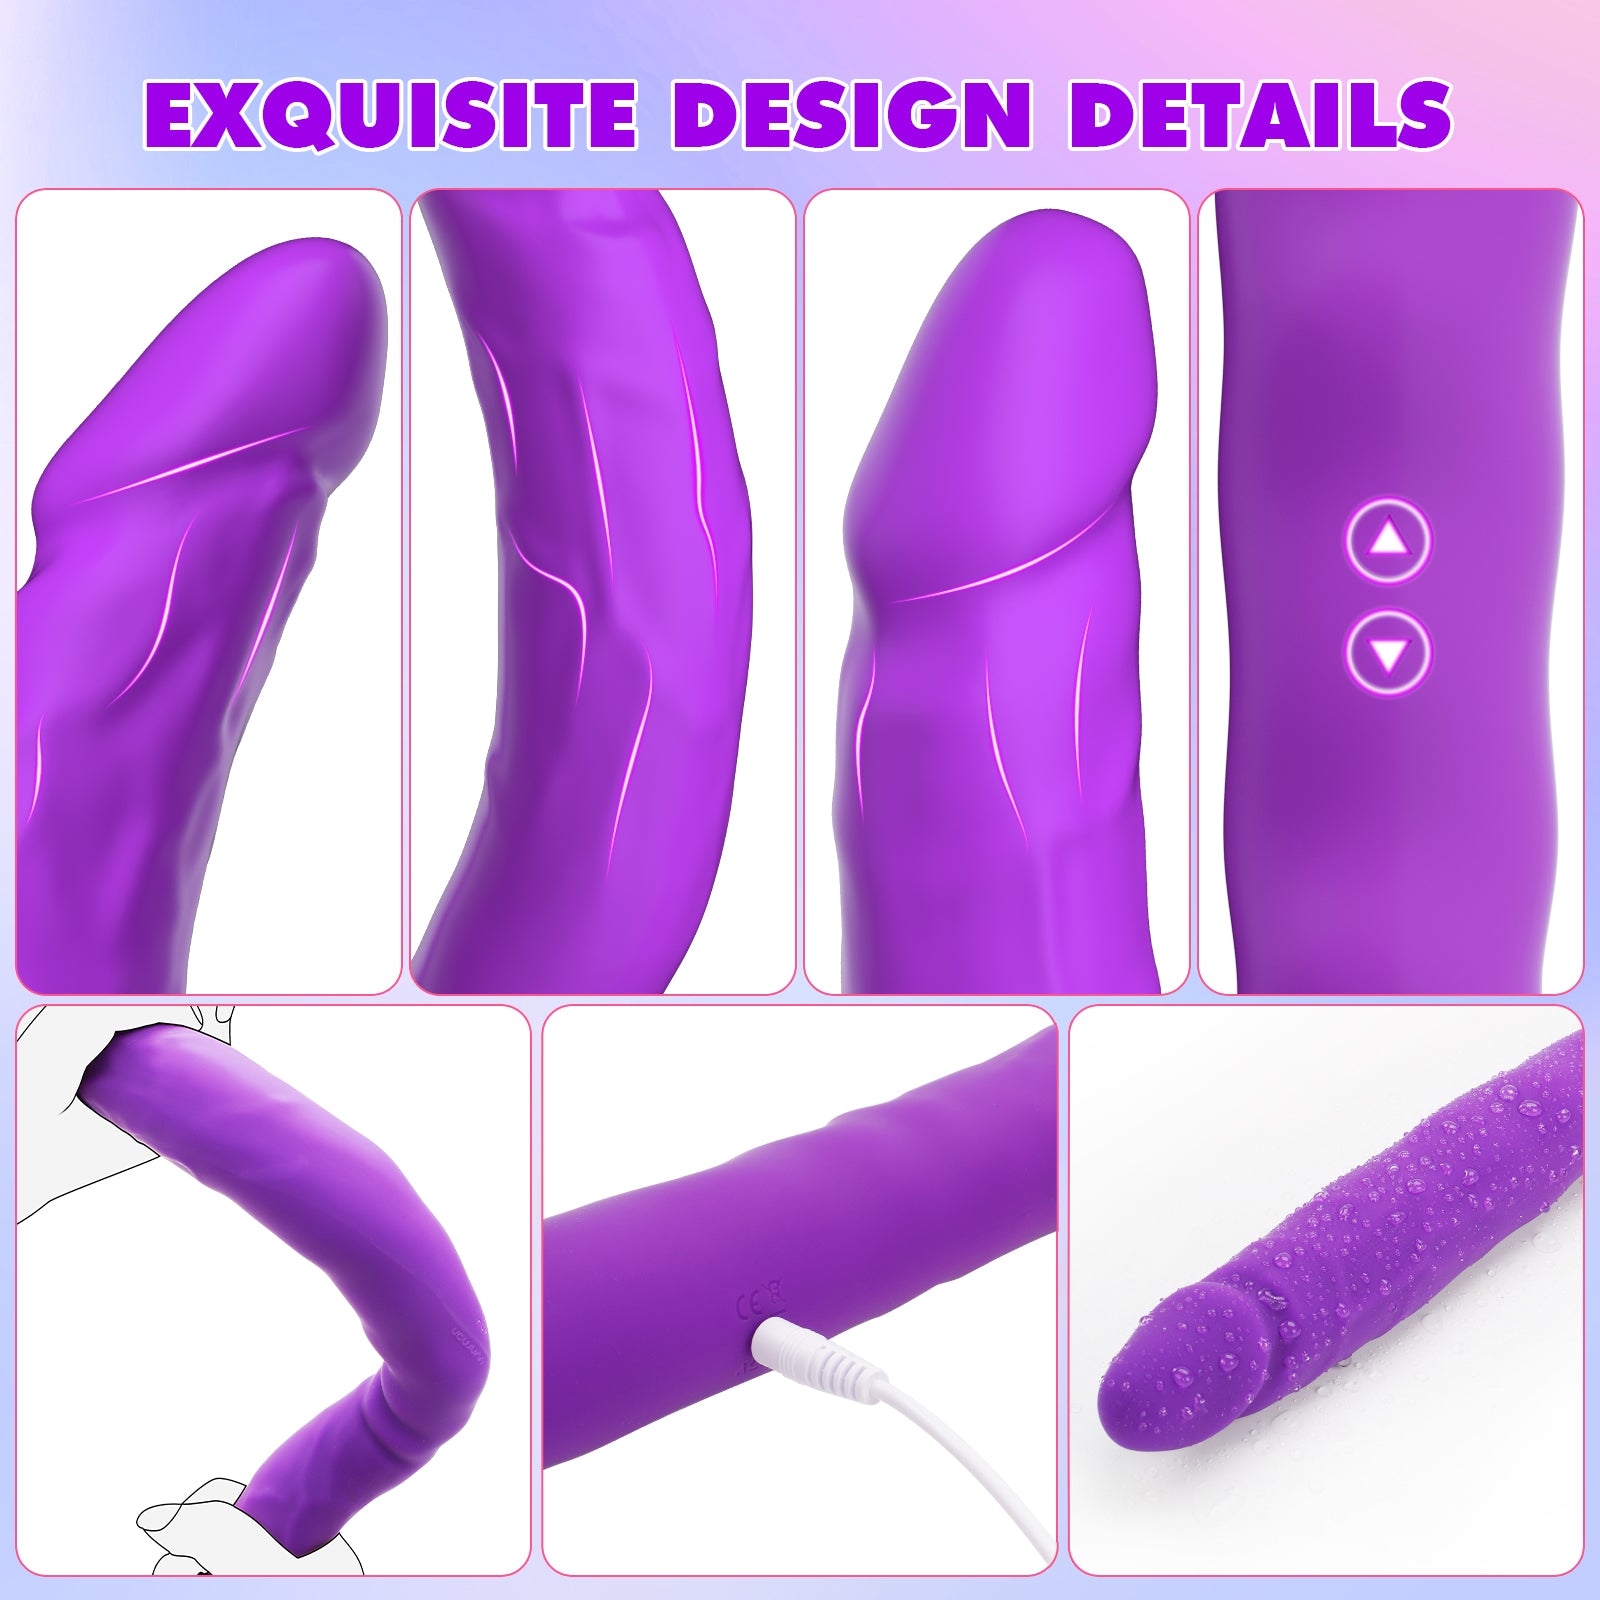 16 Inch Double Ended Heavy Veins Remote Controlled Vibrating Realistic Dildo